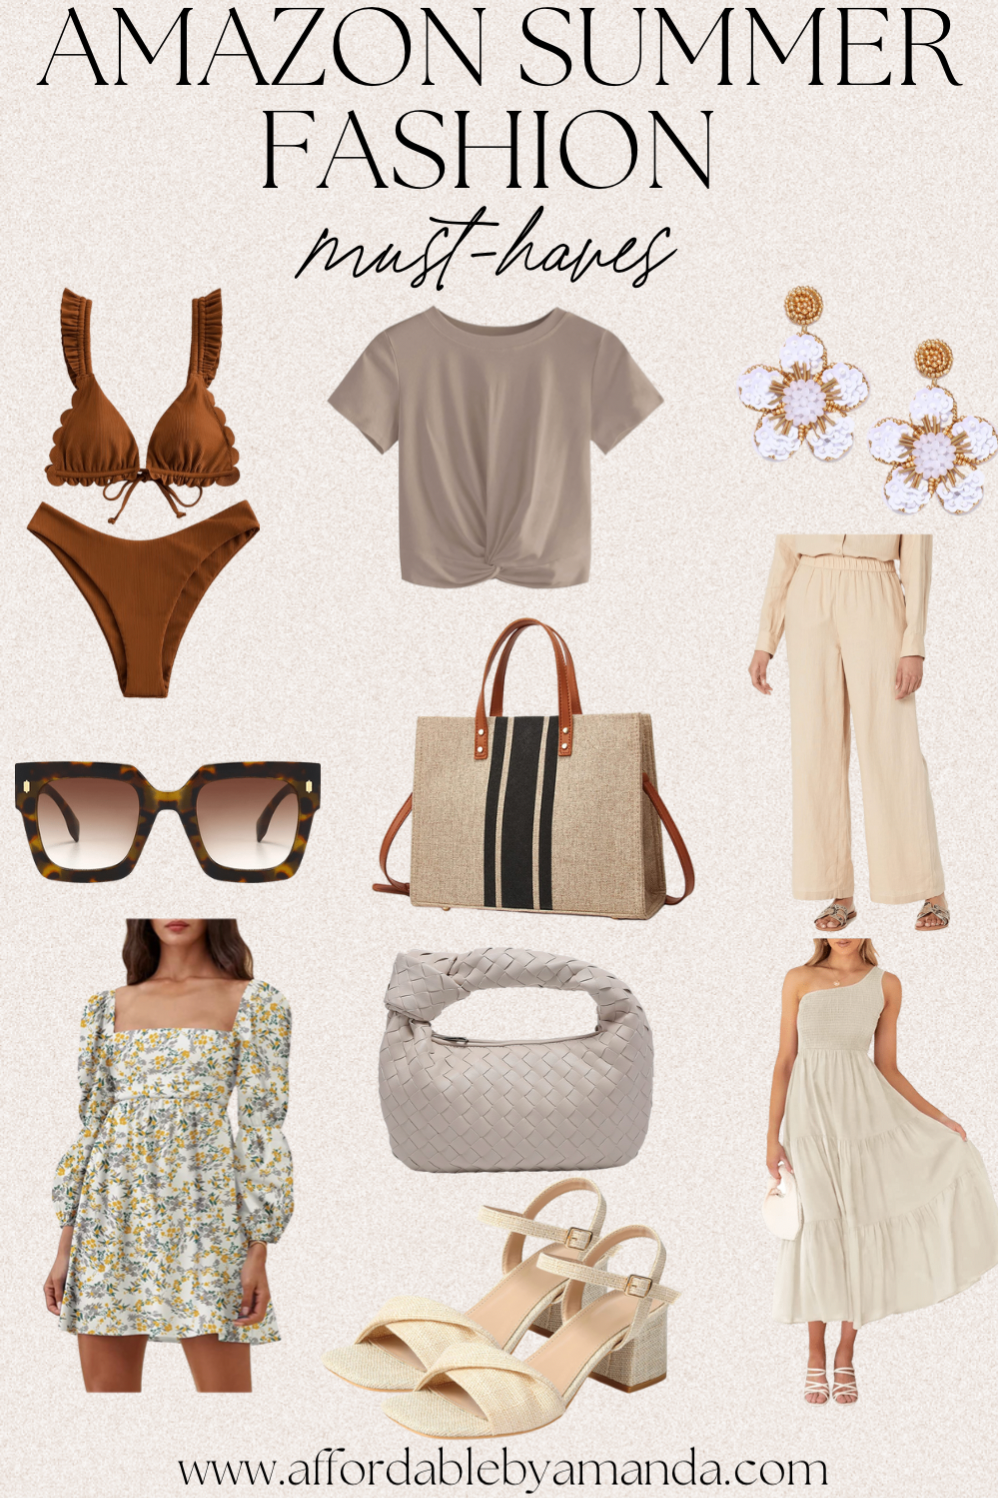 Amazon Summer Clothes 2022 - Amazon Fashion Finds in 2022 - Amazon Summer Fashion Must-Haves in 2022 - Affordable Amazon Finds